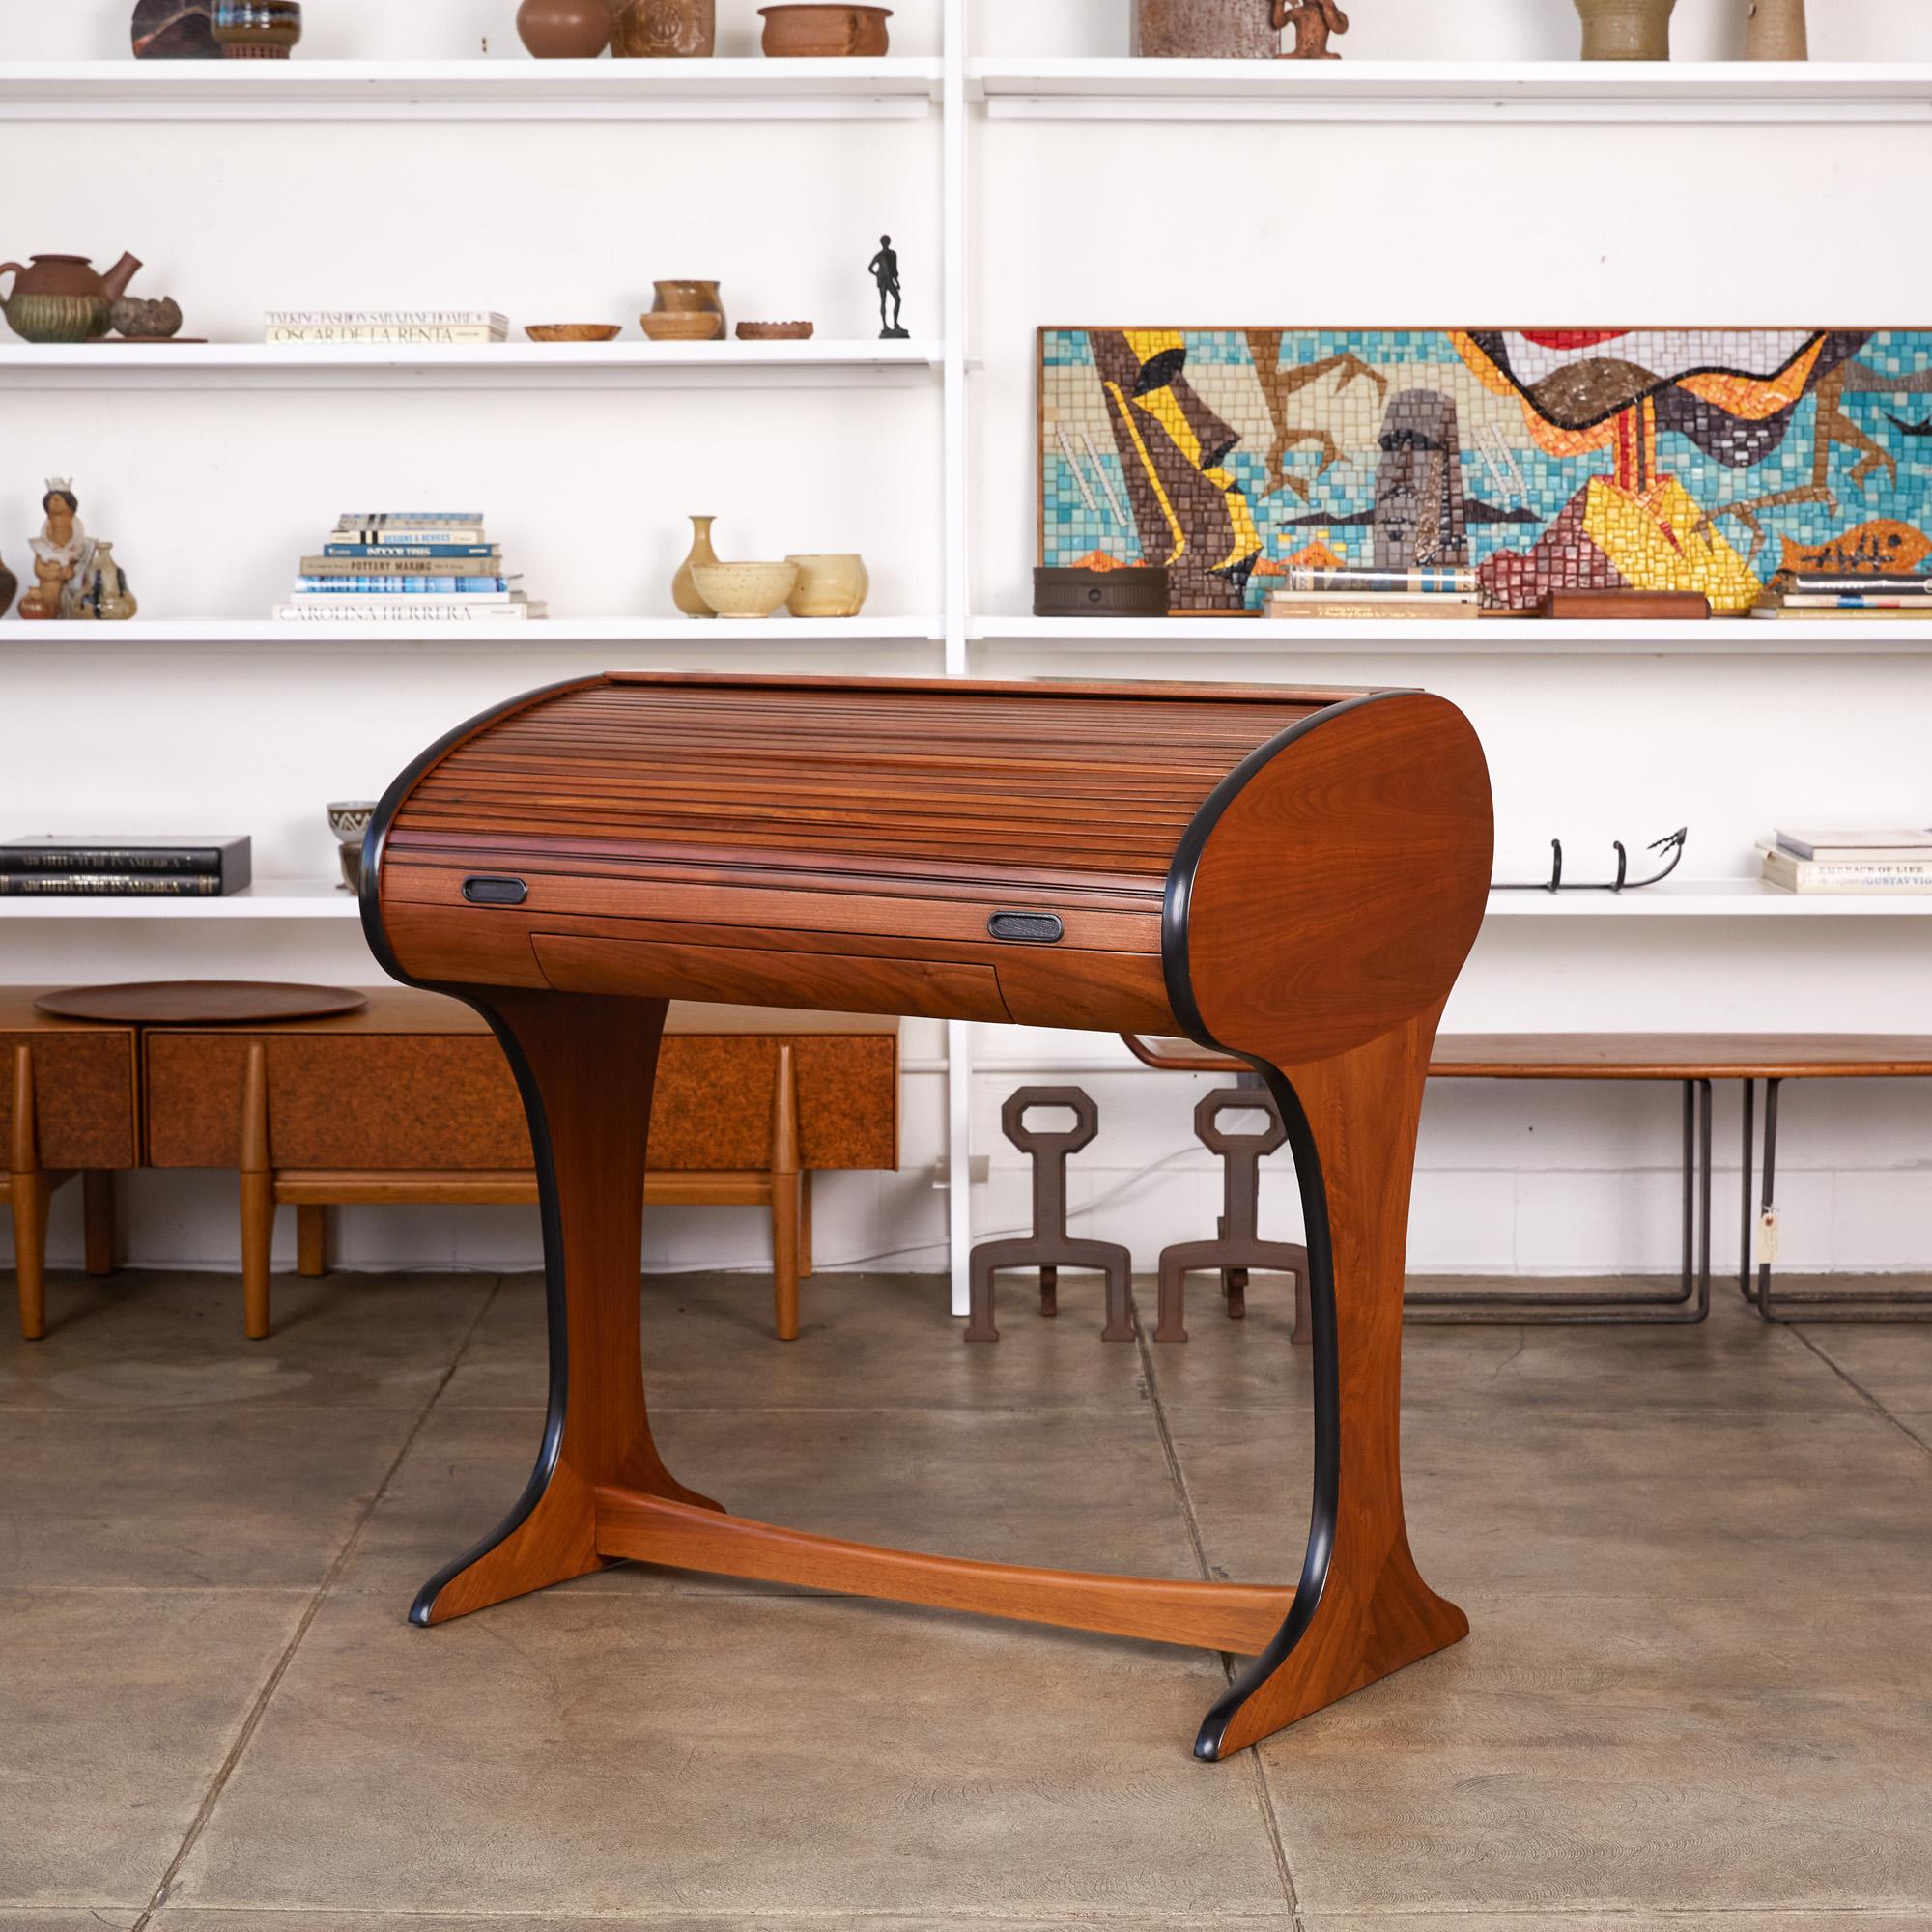 Dunbar style roll top writing desk. The desk features a walnut frame and tambour door, with black painted trim. The slatted wood pattern of the tambour door is repeated on the reverse side of the body. The sculpted walnut legs flow seamlessly from